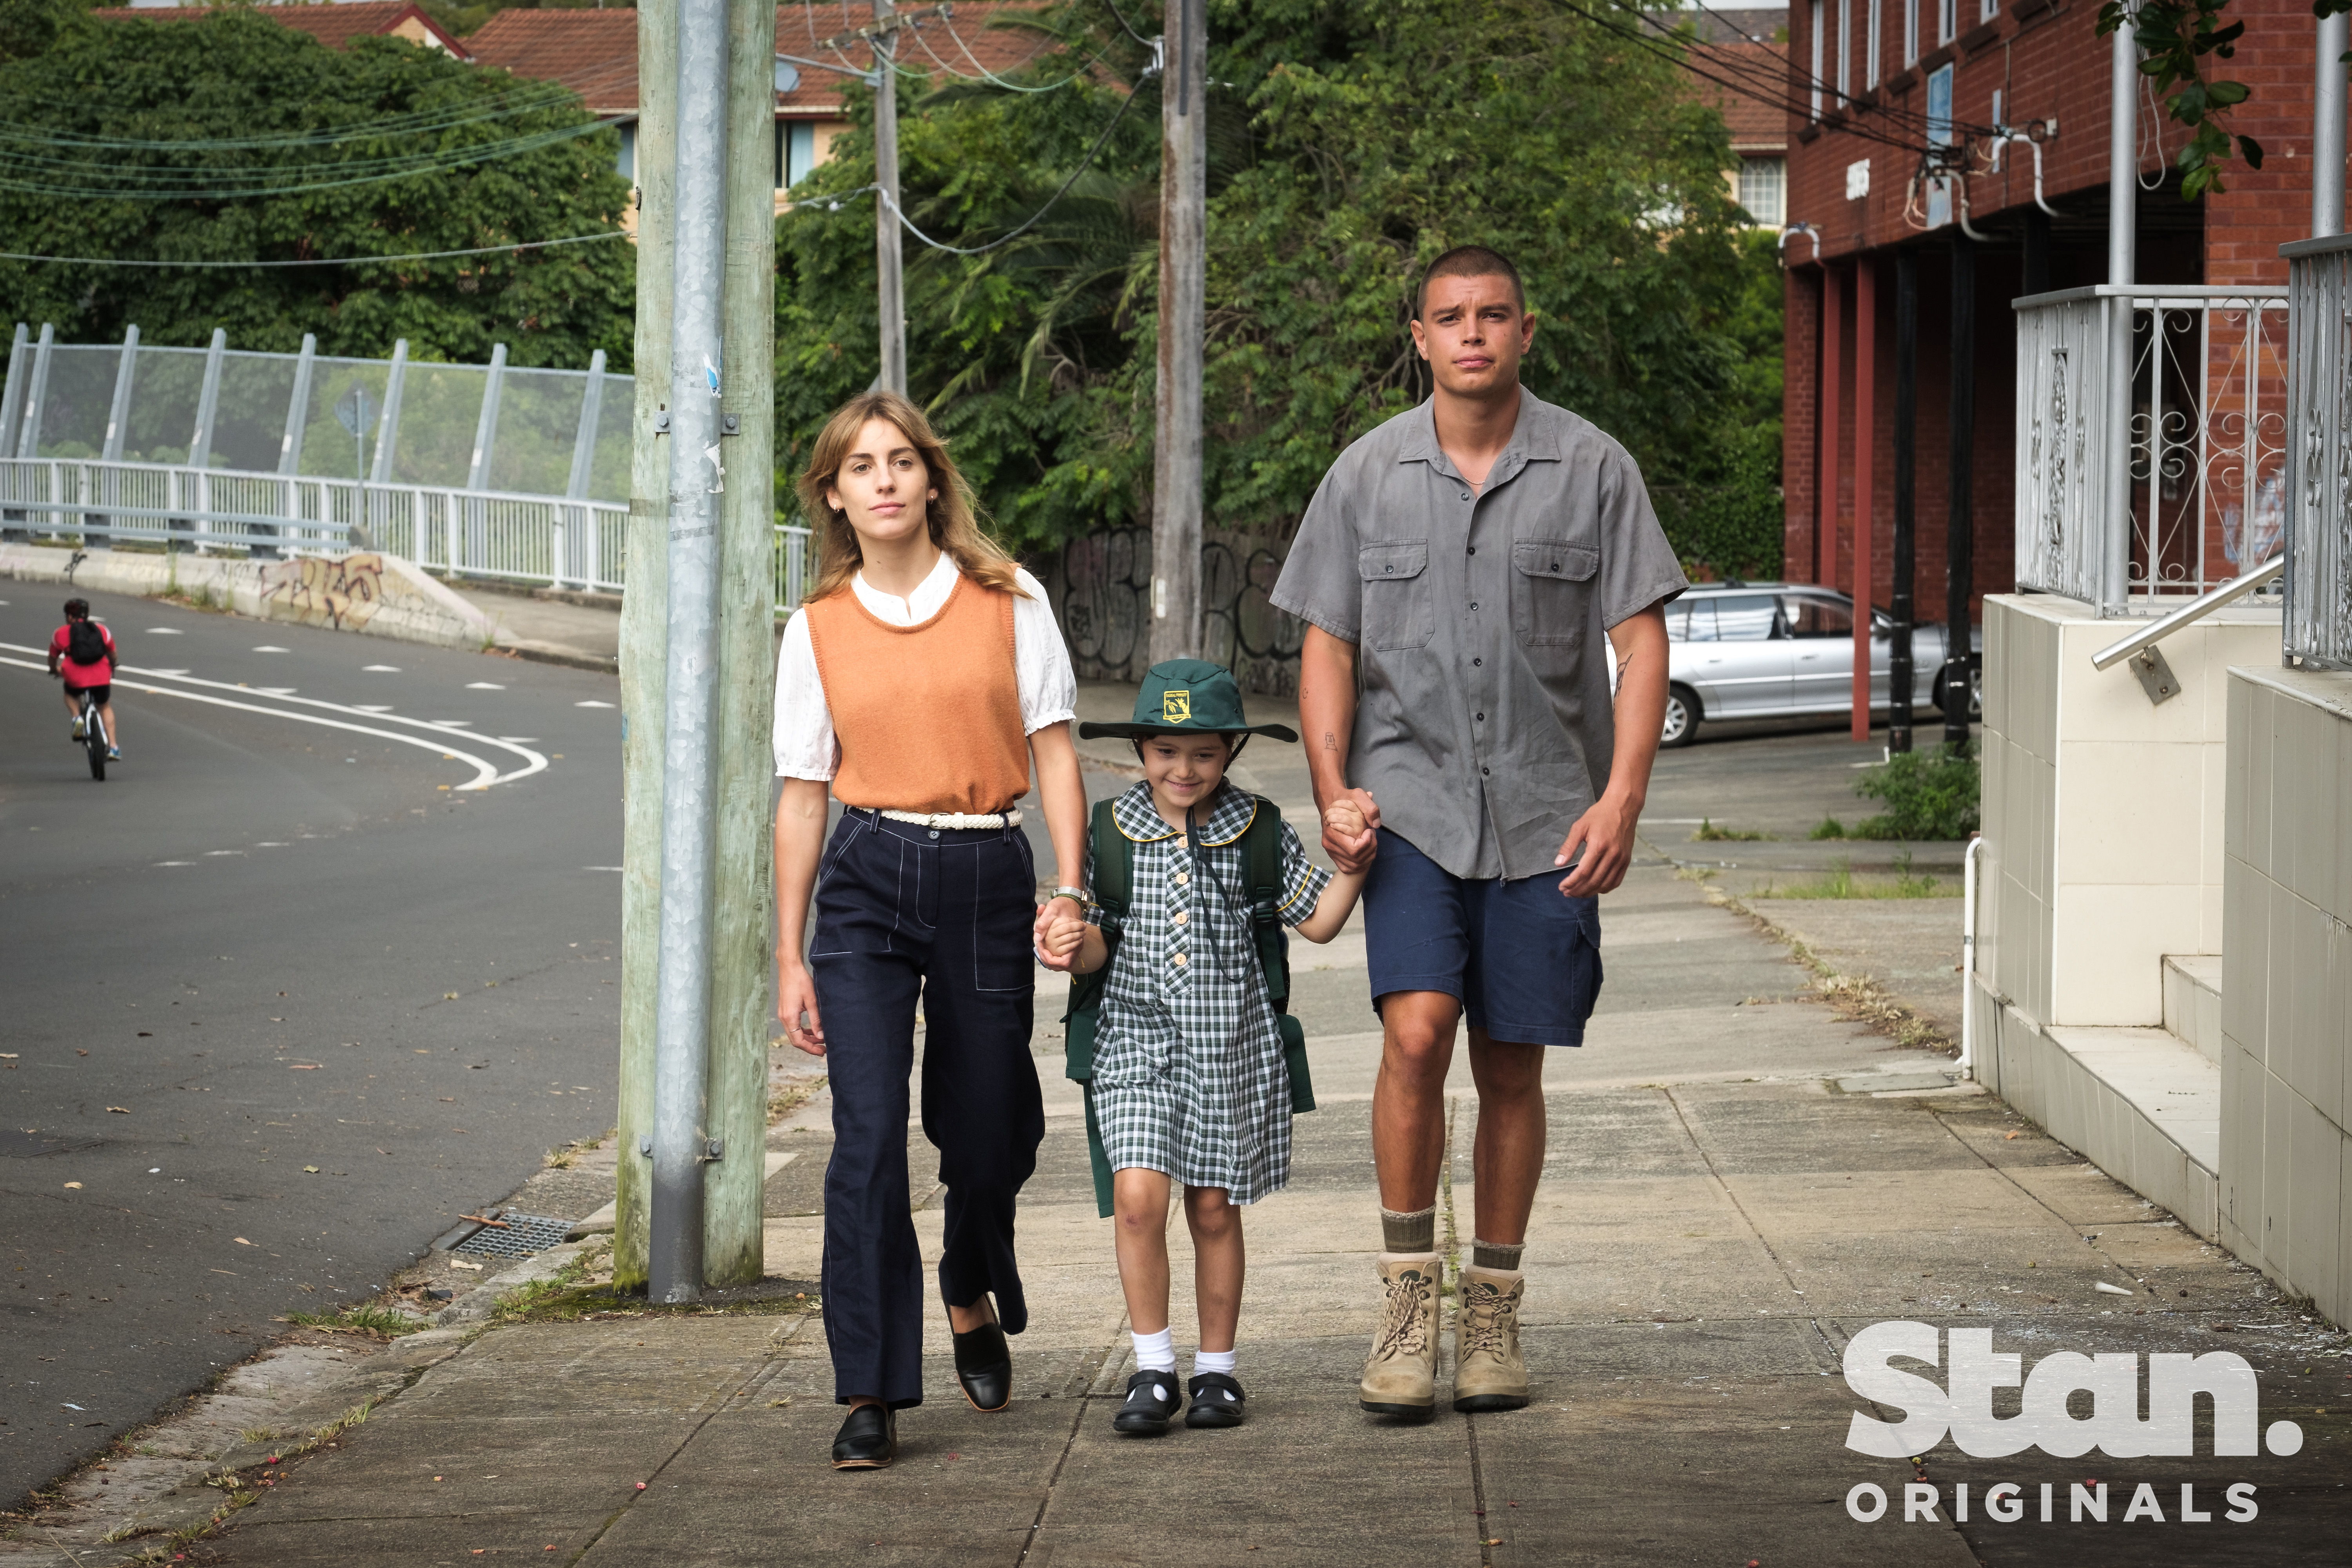 Bump nominated for Best Drama Series
Pictured - Nathalie Morris, Ava Cannon, Carlos Sanson Jnr.